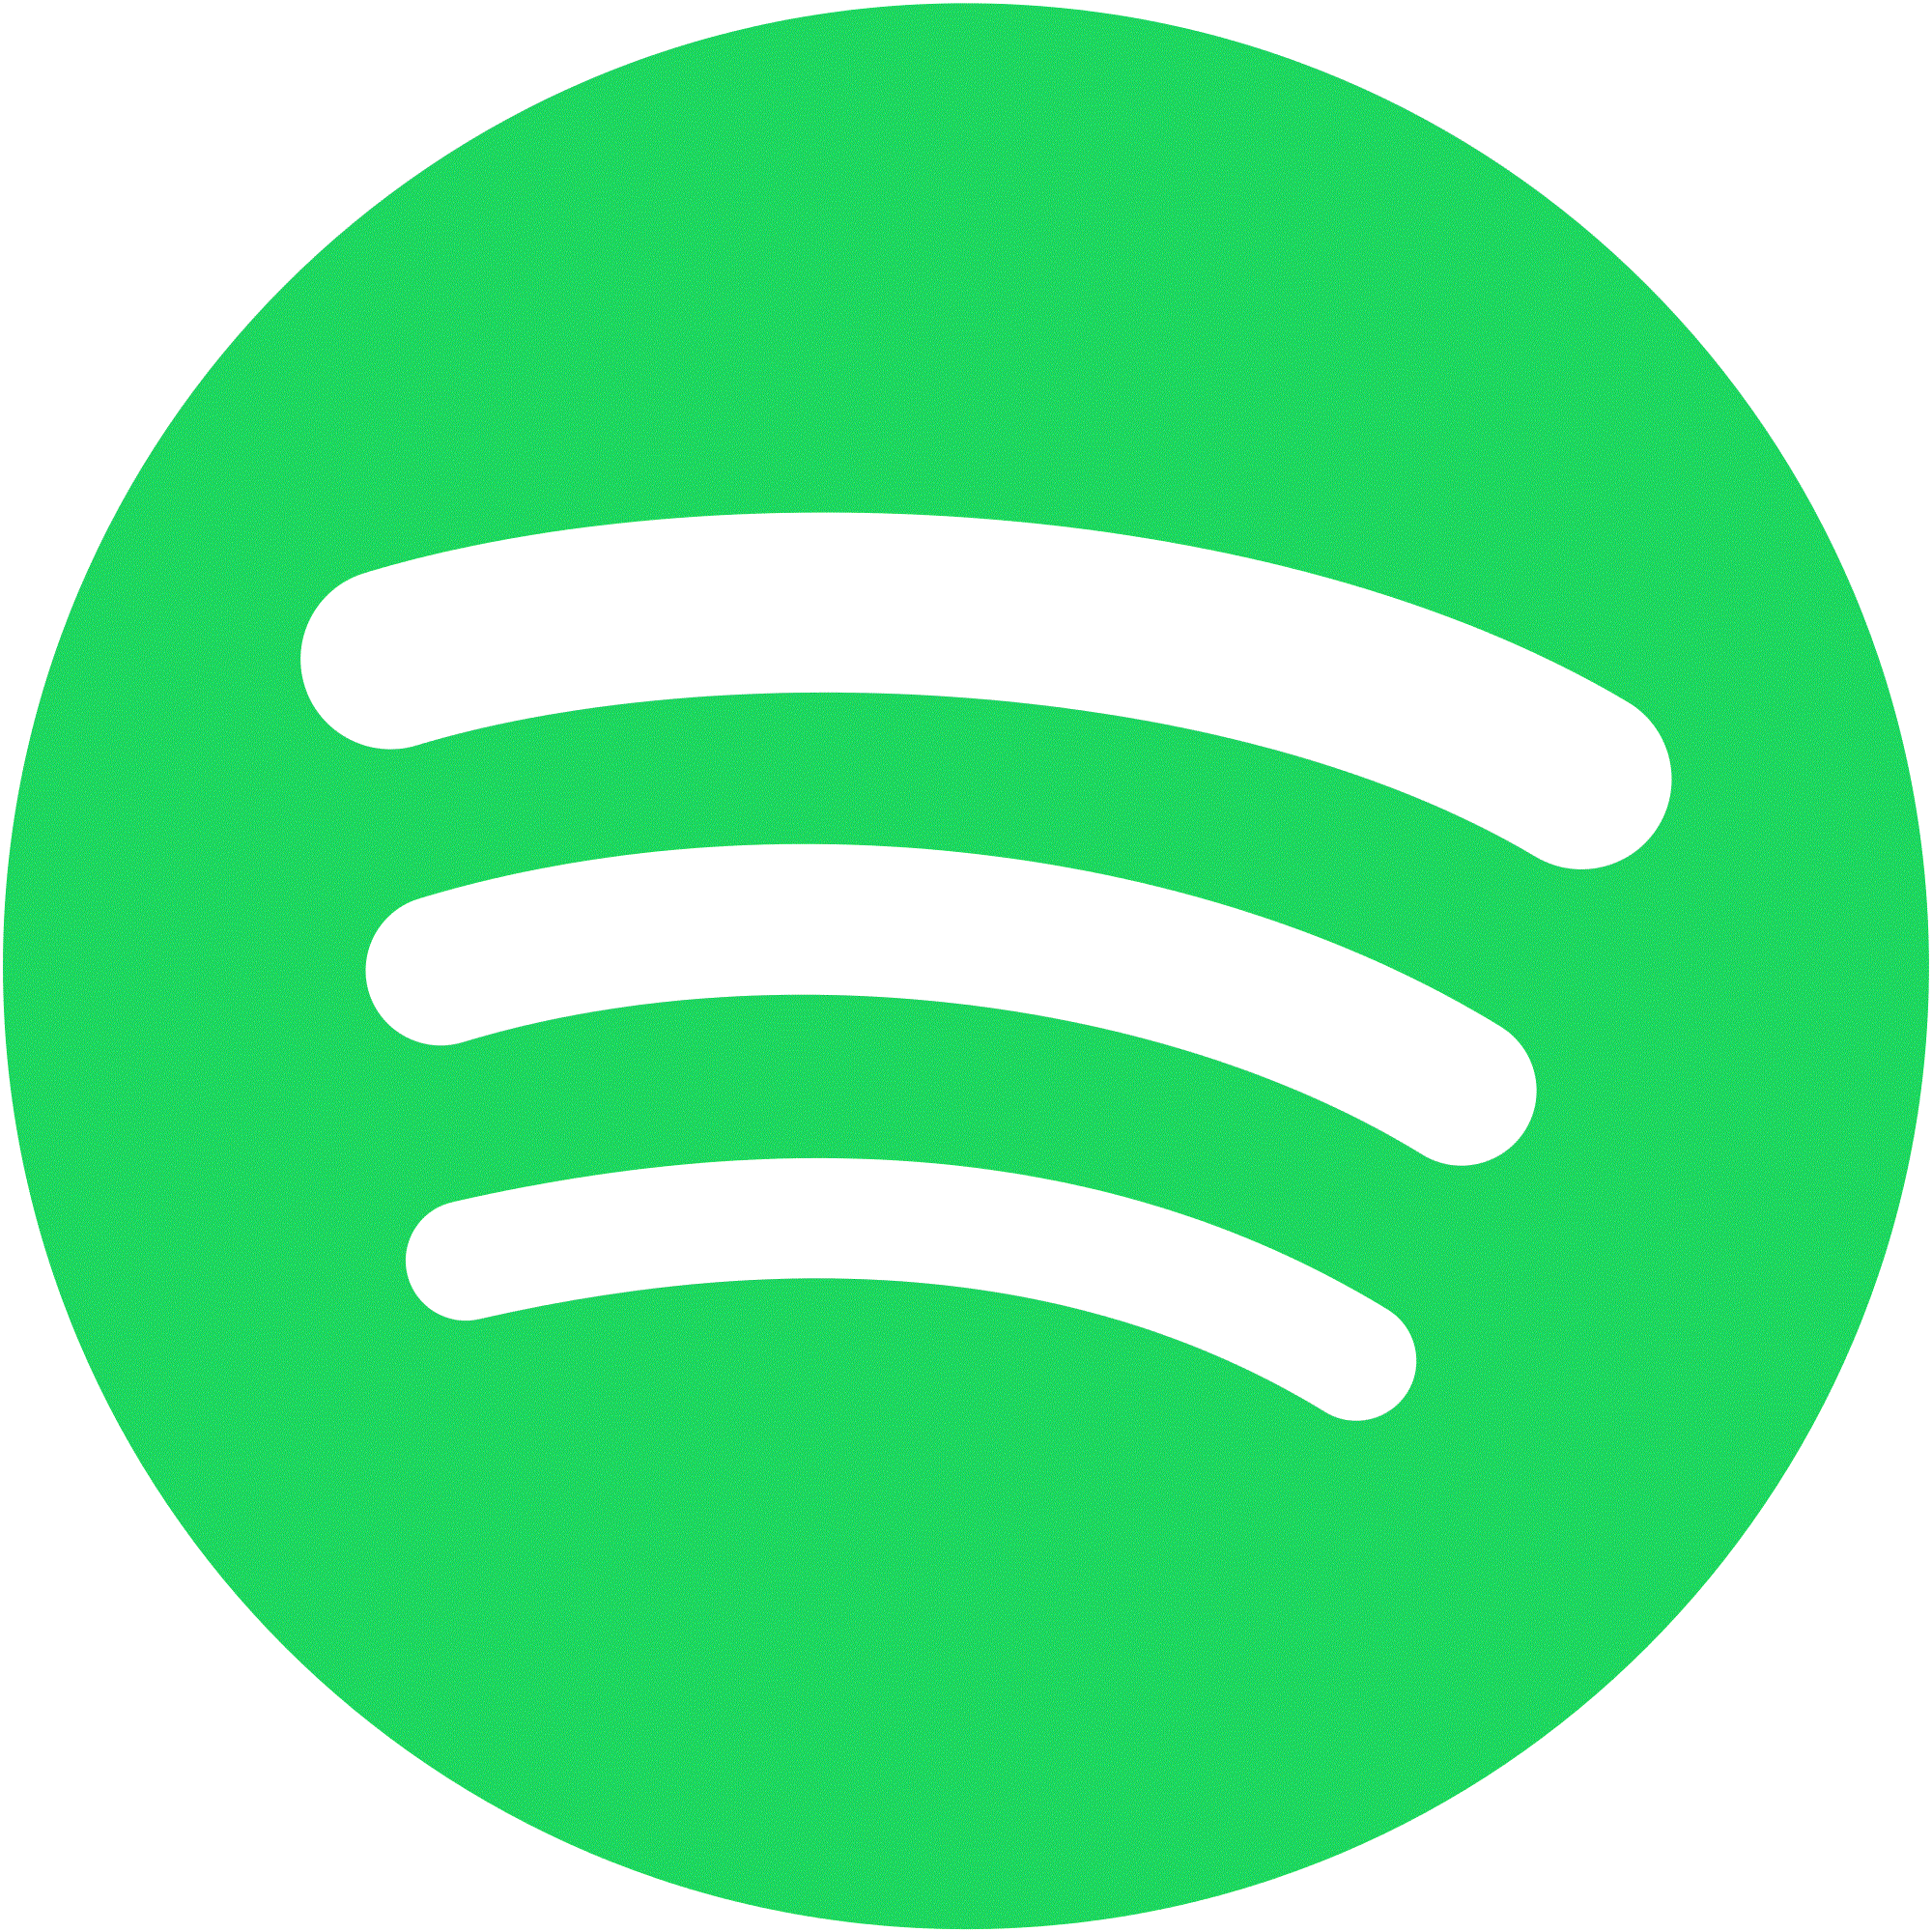 Spotify_Logo.gif Moonlyn, Moonlyn Music, Moonlyn's official website, Moonlyn, Moonlyn Photos, Moonlyn Pix, Happiness, La la la Song, Spotify Hit, Hit Song, Positive Song, Song with Positive Message, Uplifting Song, Happy Song, Pop Song, Soprano, Diva, Toronto